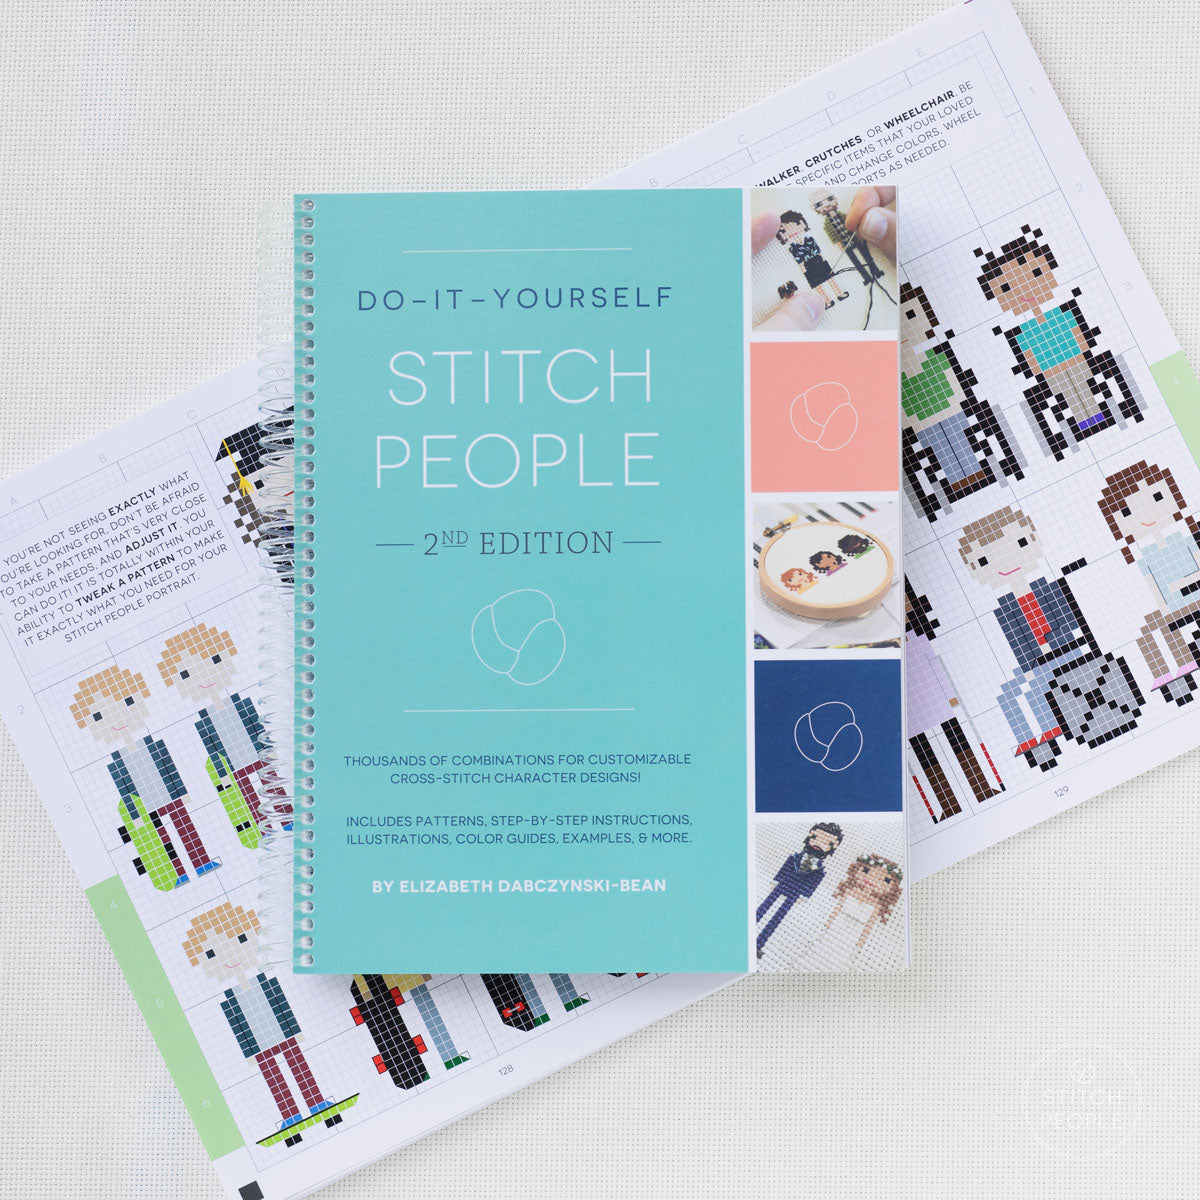 The Ultimate Do-It-Yourself Stitch People Guide - Stitched Modern